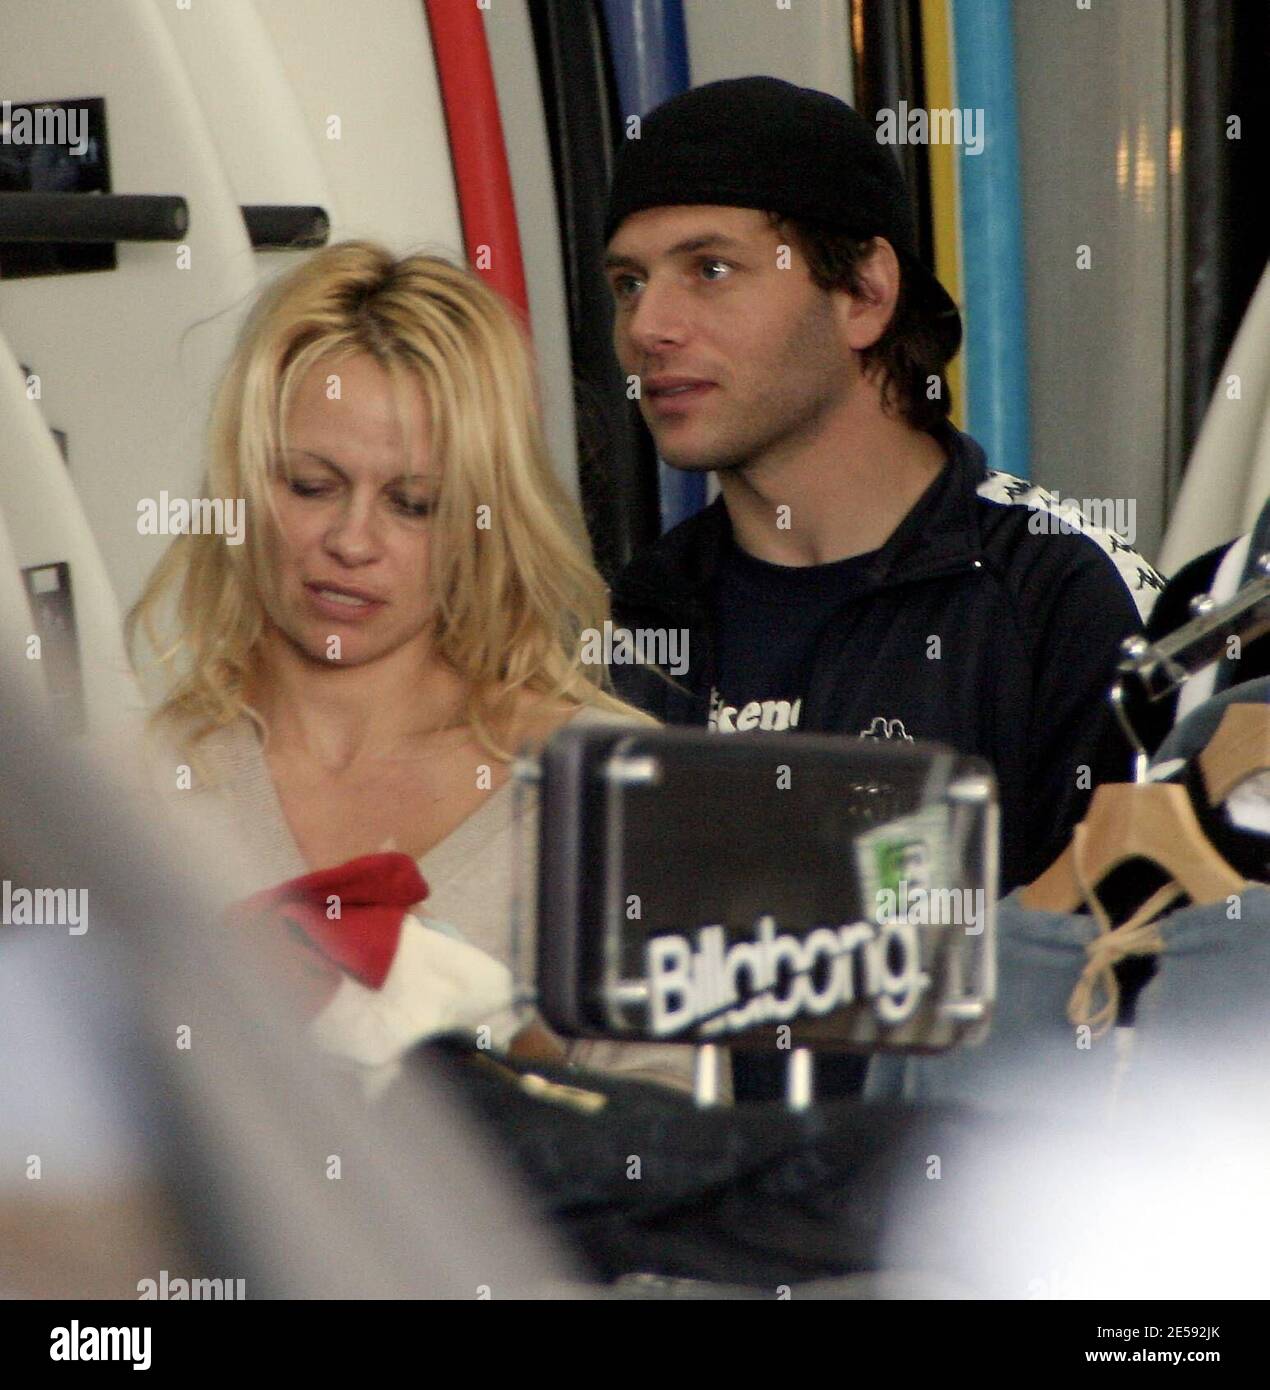 Exclusive!! Pamela Anderson and her husband Rick Salomon go Christmas  shopping for the kids at a surfing store near Anderson's home. The actress  was still without a wedding ring and was dressed